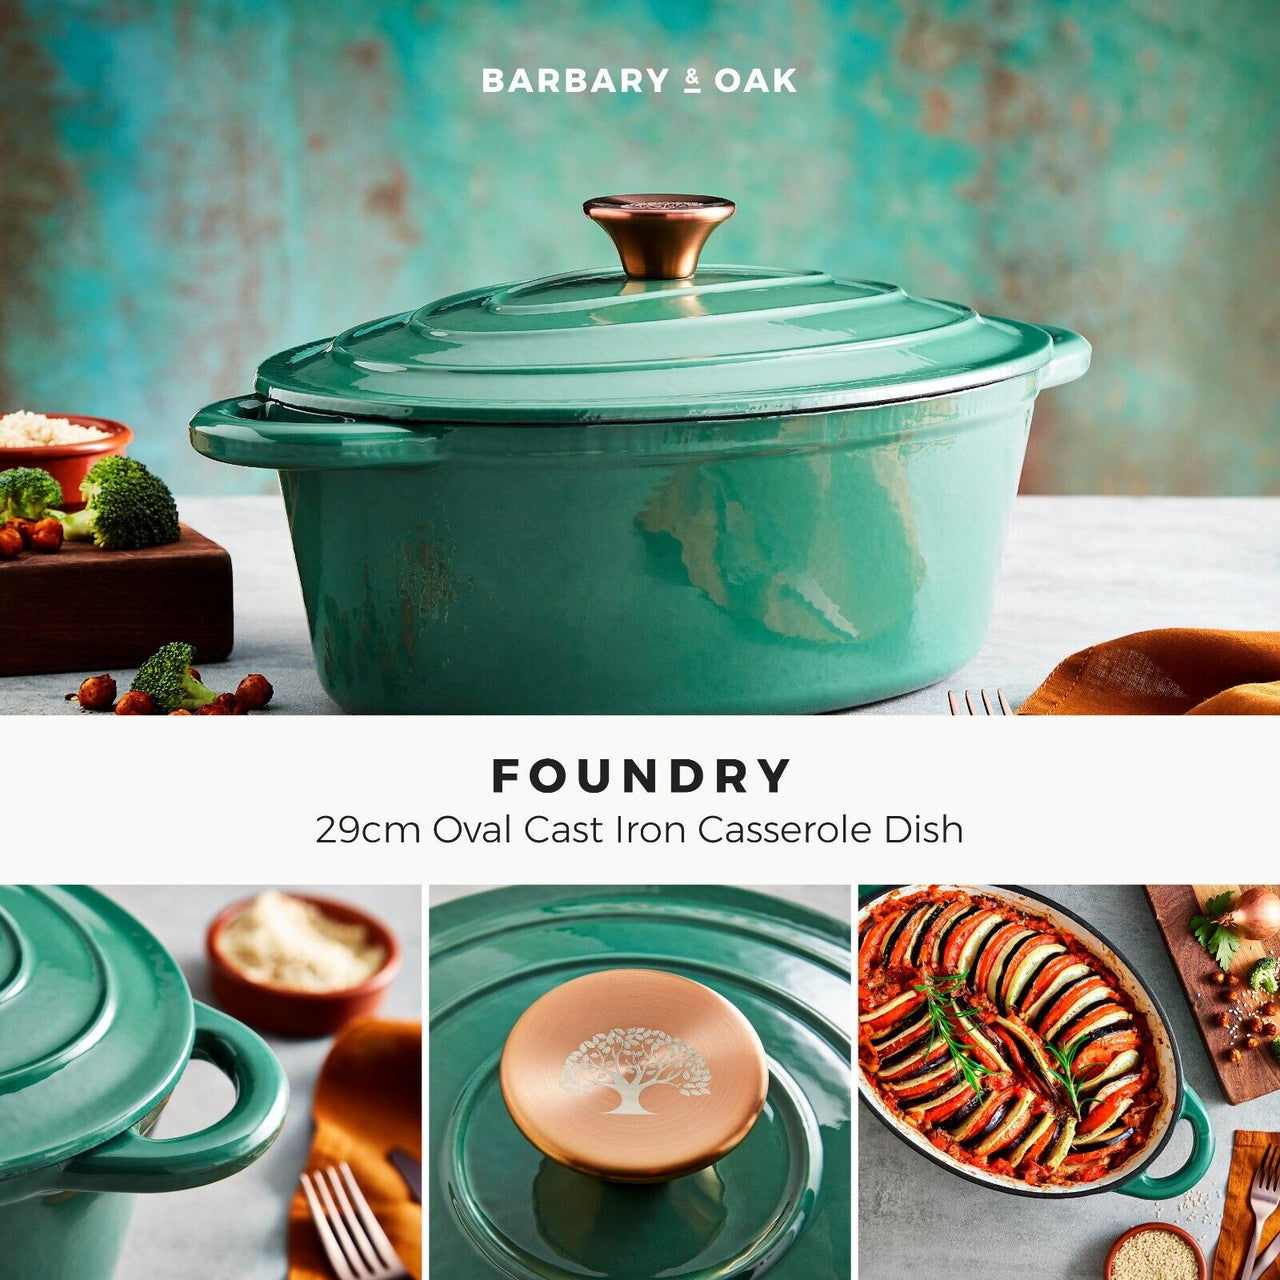 Barbary & Oak 29cm Oval Casserole Dish Cast Iron in Verdigris Green with 25 Year Guarantee